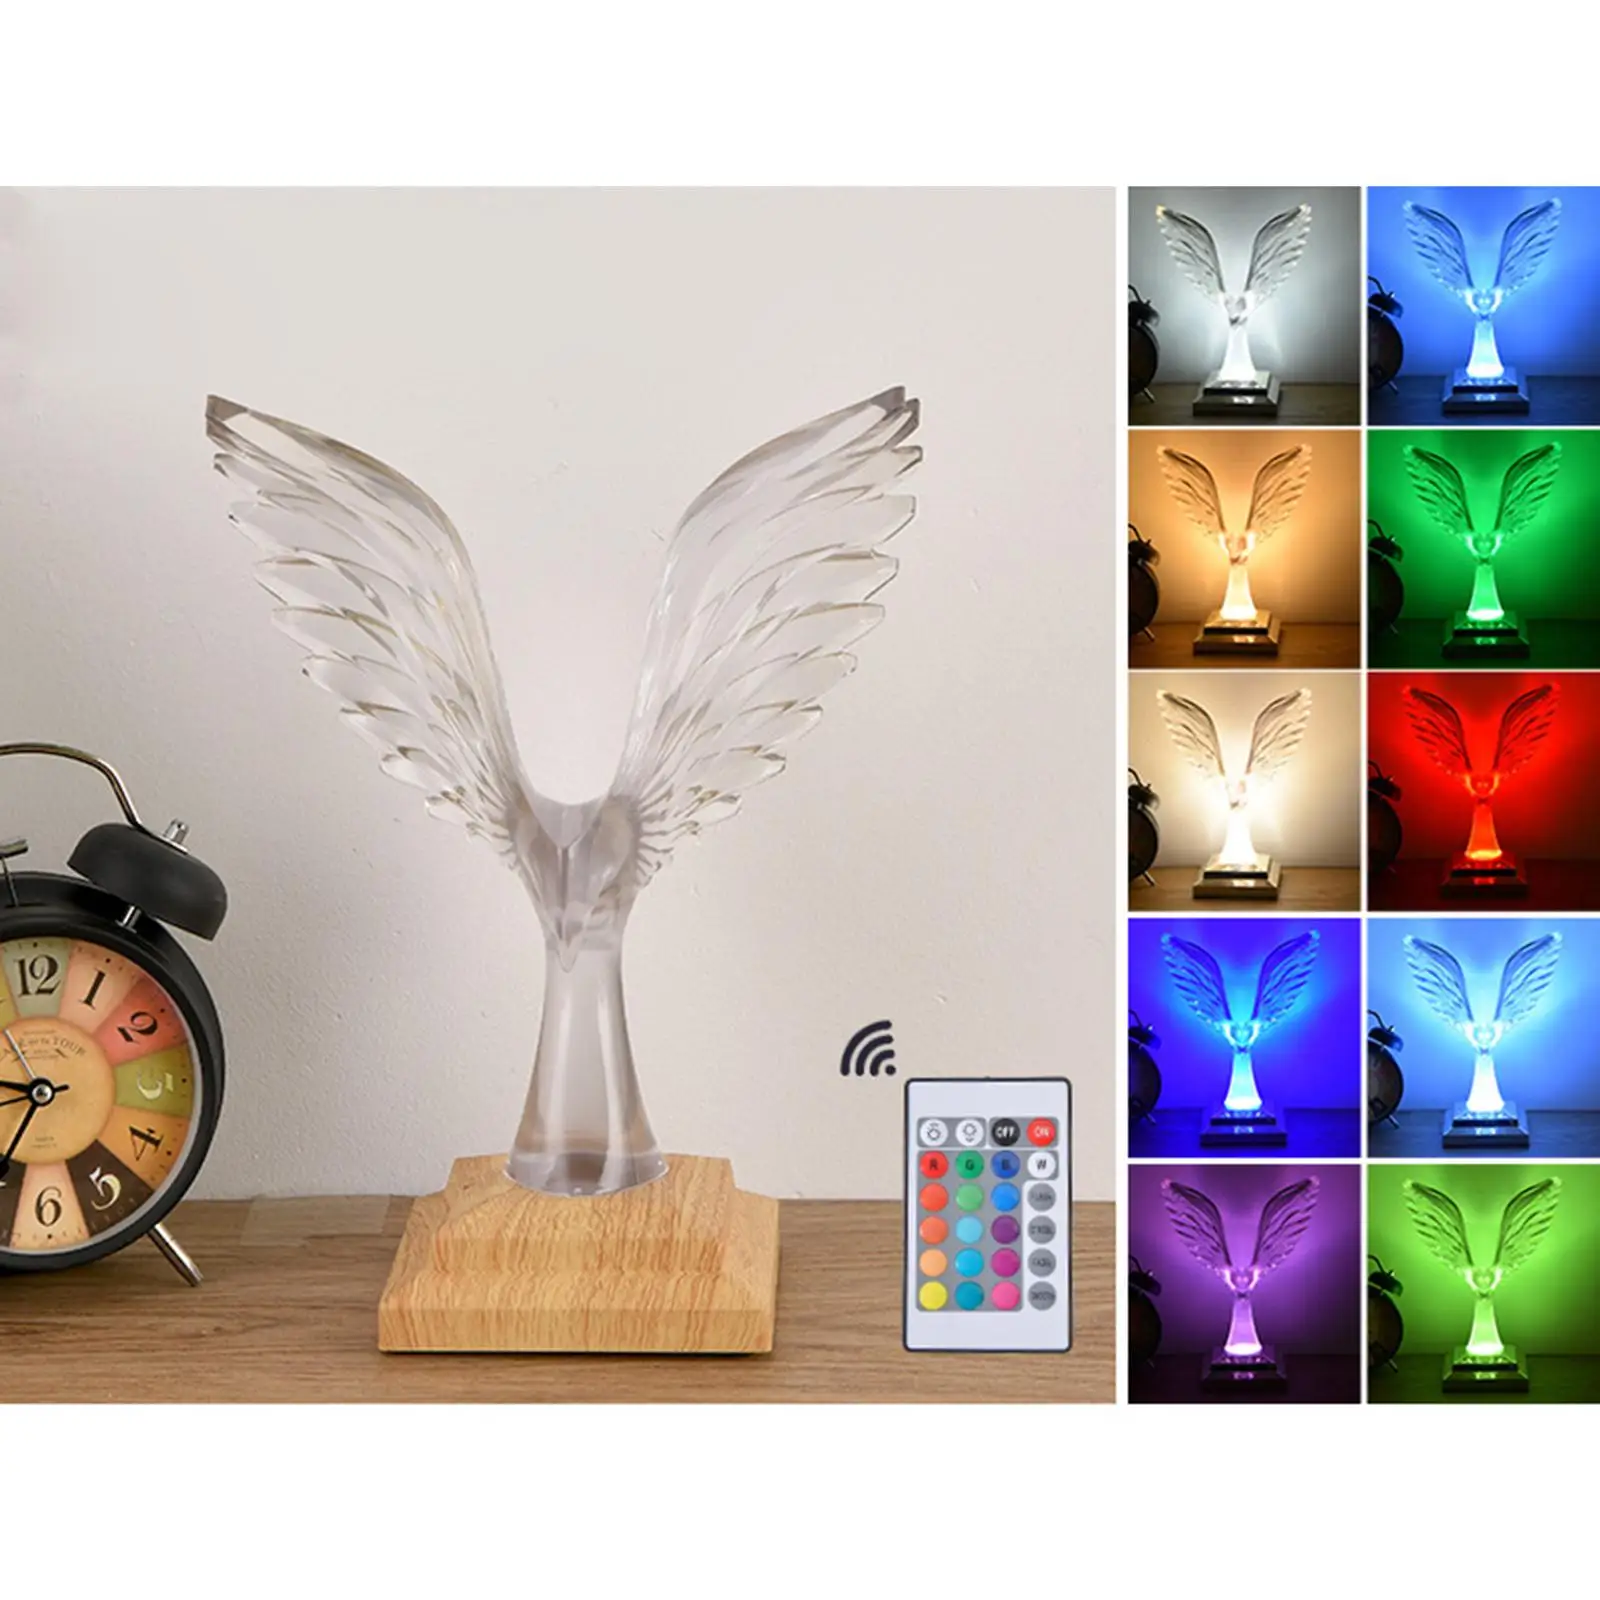 Modern Table Lamp RGB Atmosphere Light Touch Control USB Colorful Nightlight